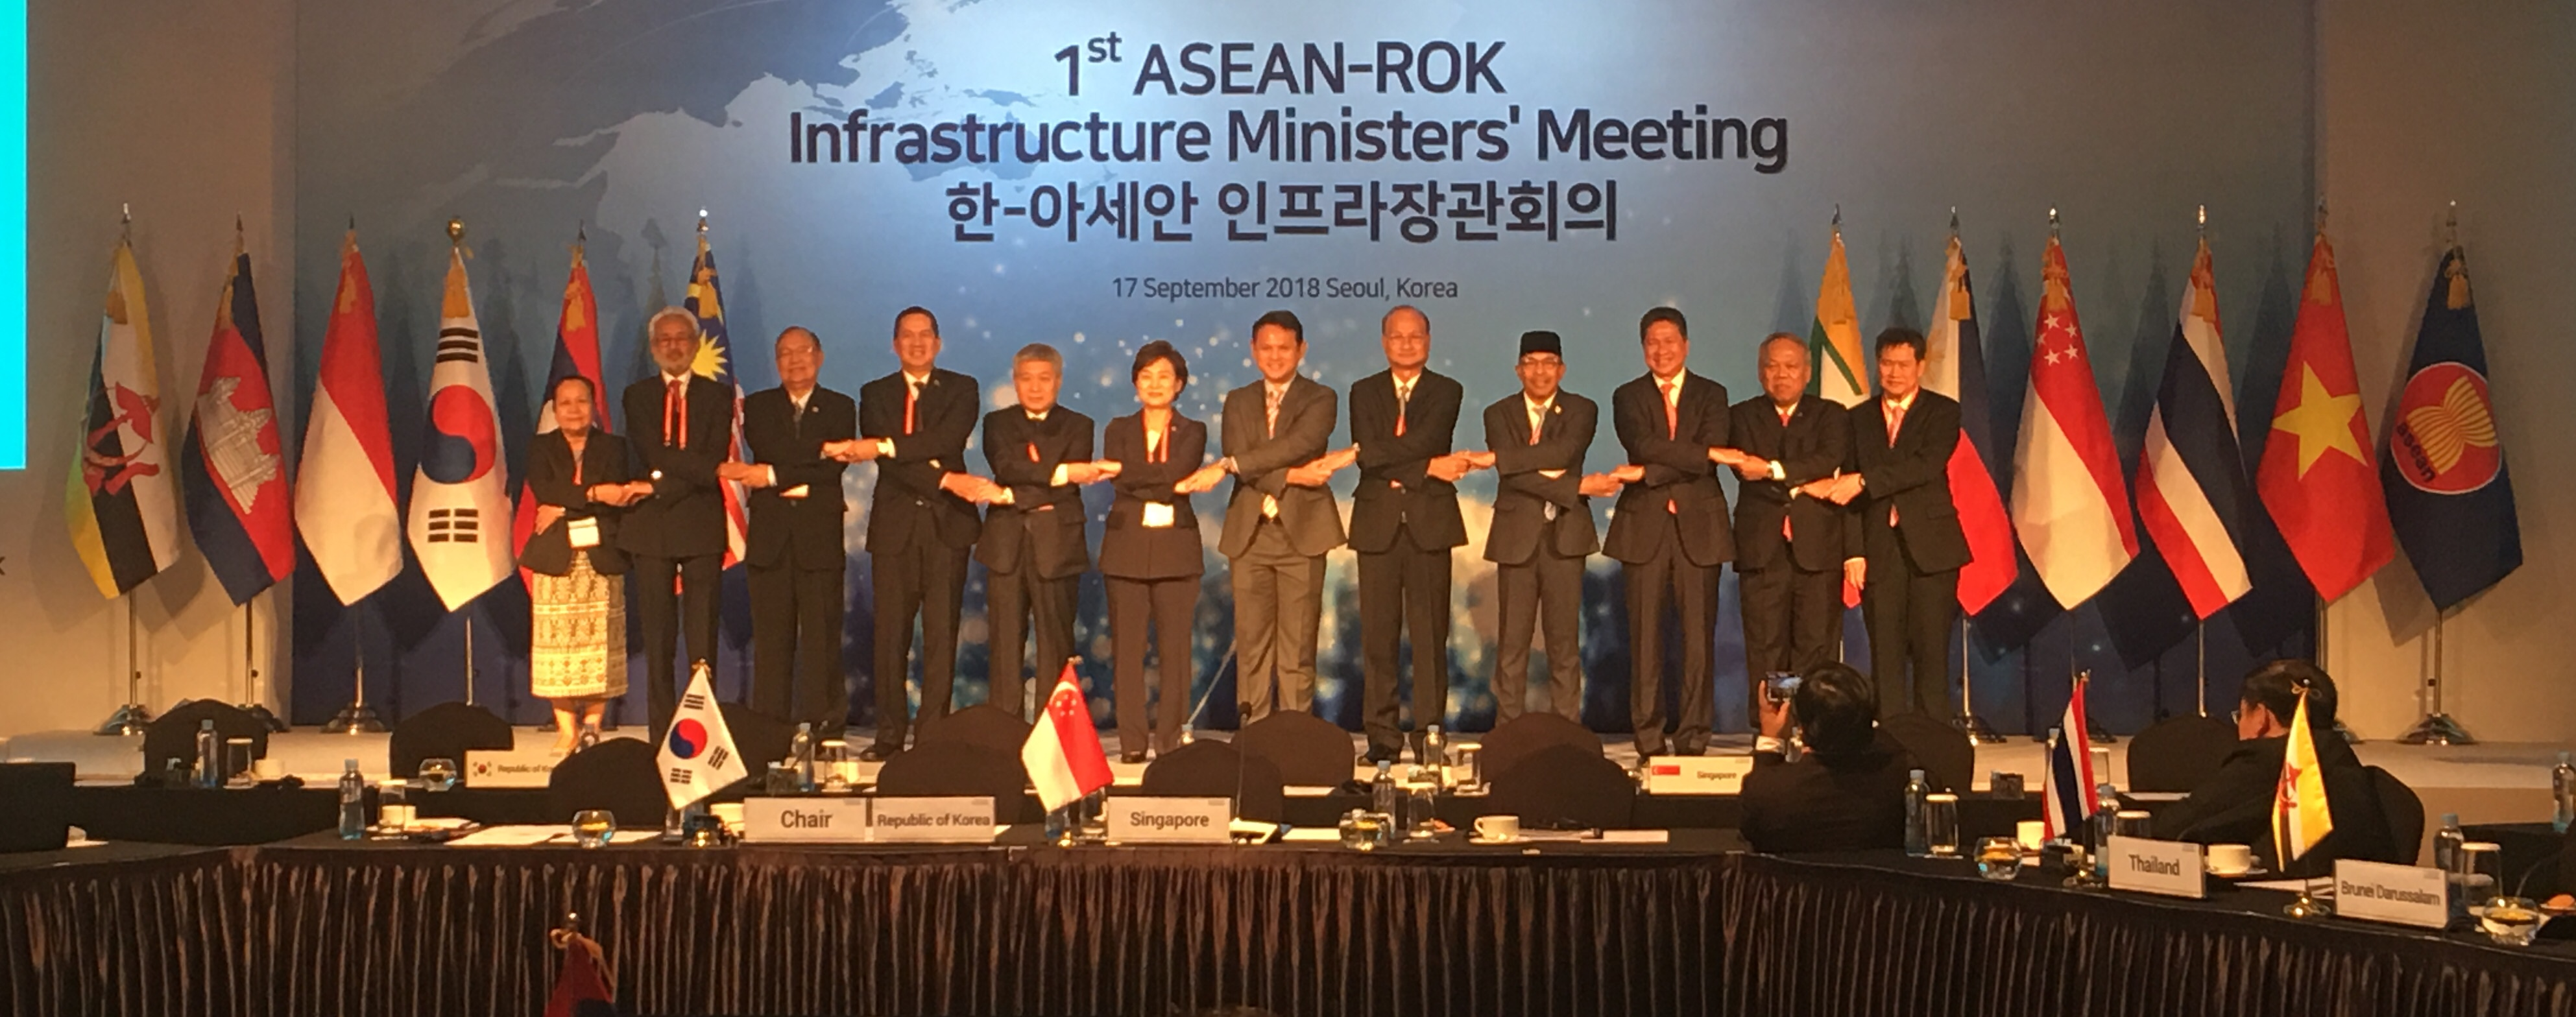 4_1st ASEAN-ROK INFRASTRUCTURE MINISTERS' MEETING.png